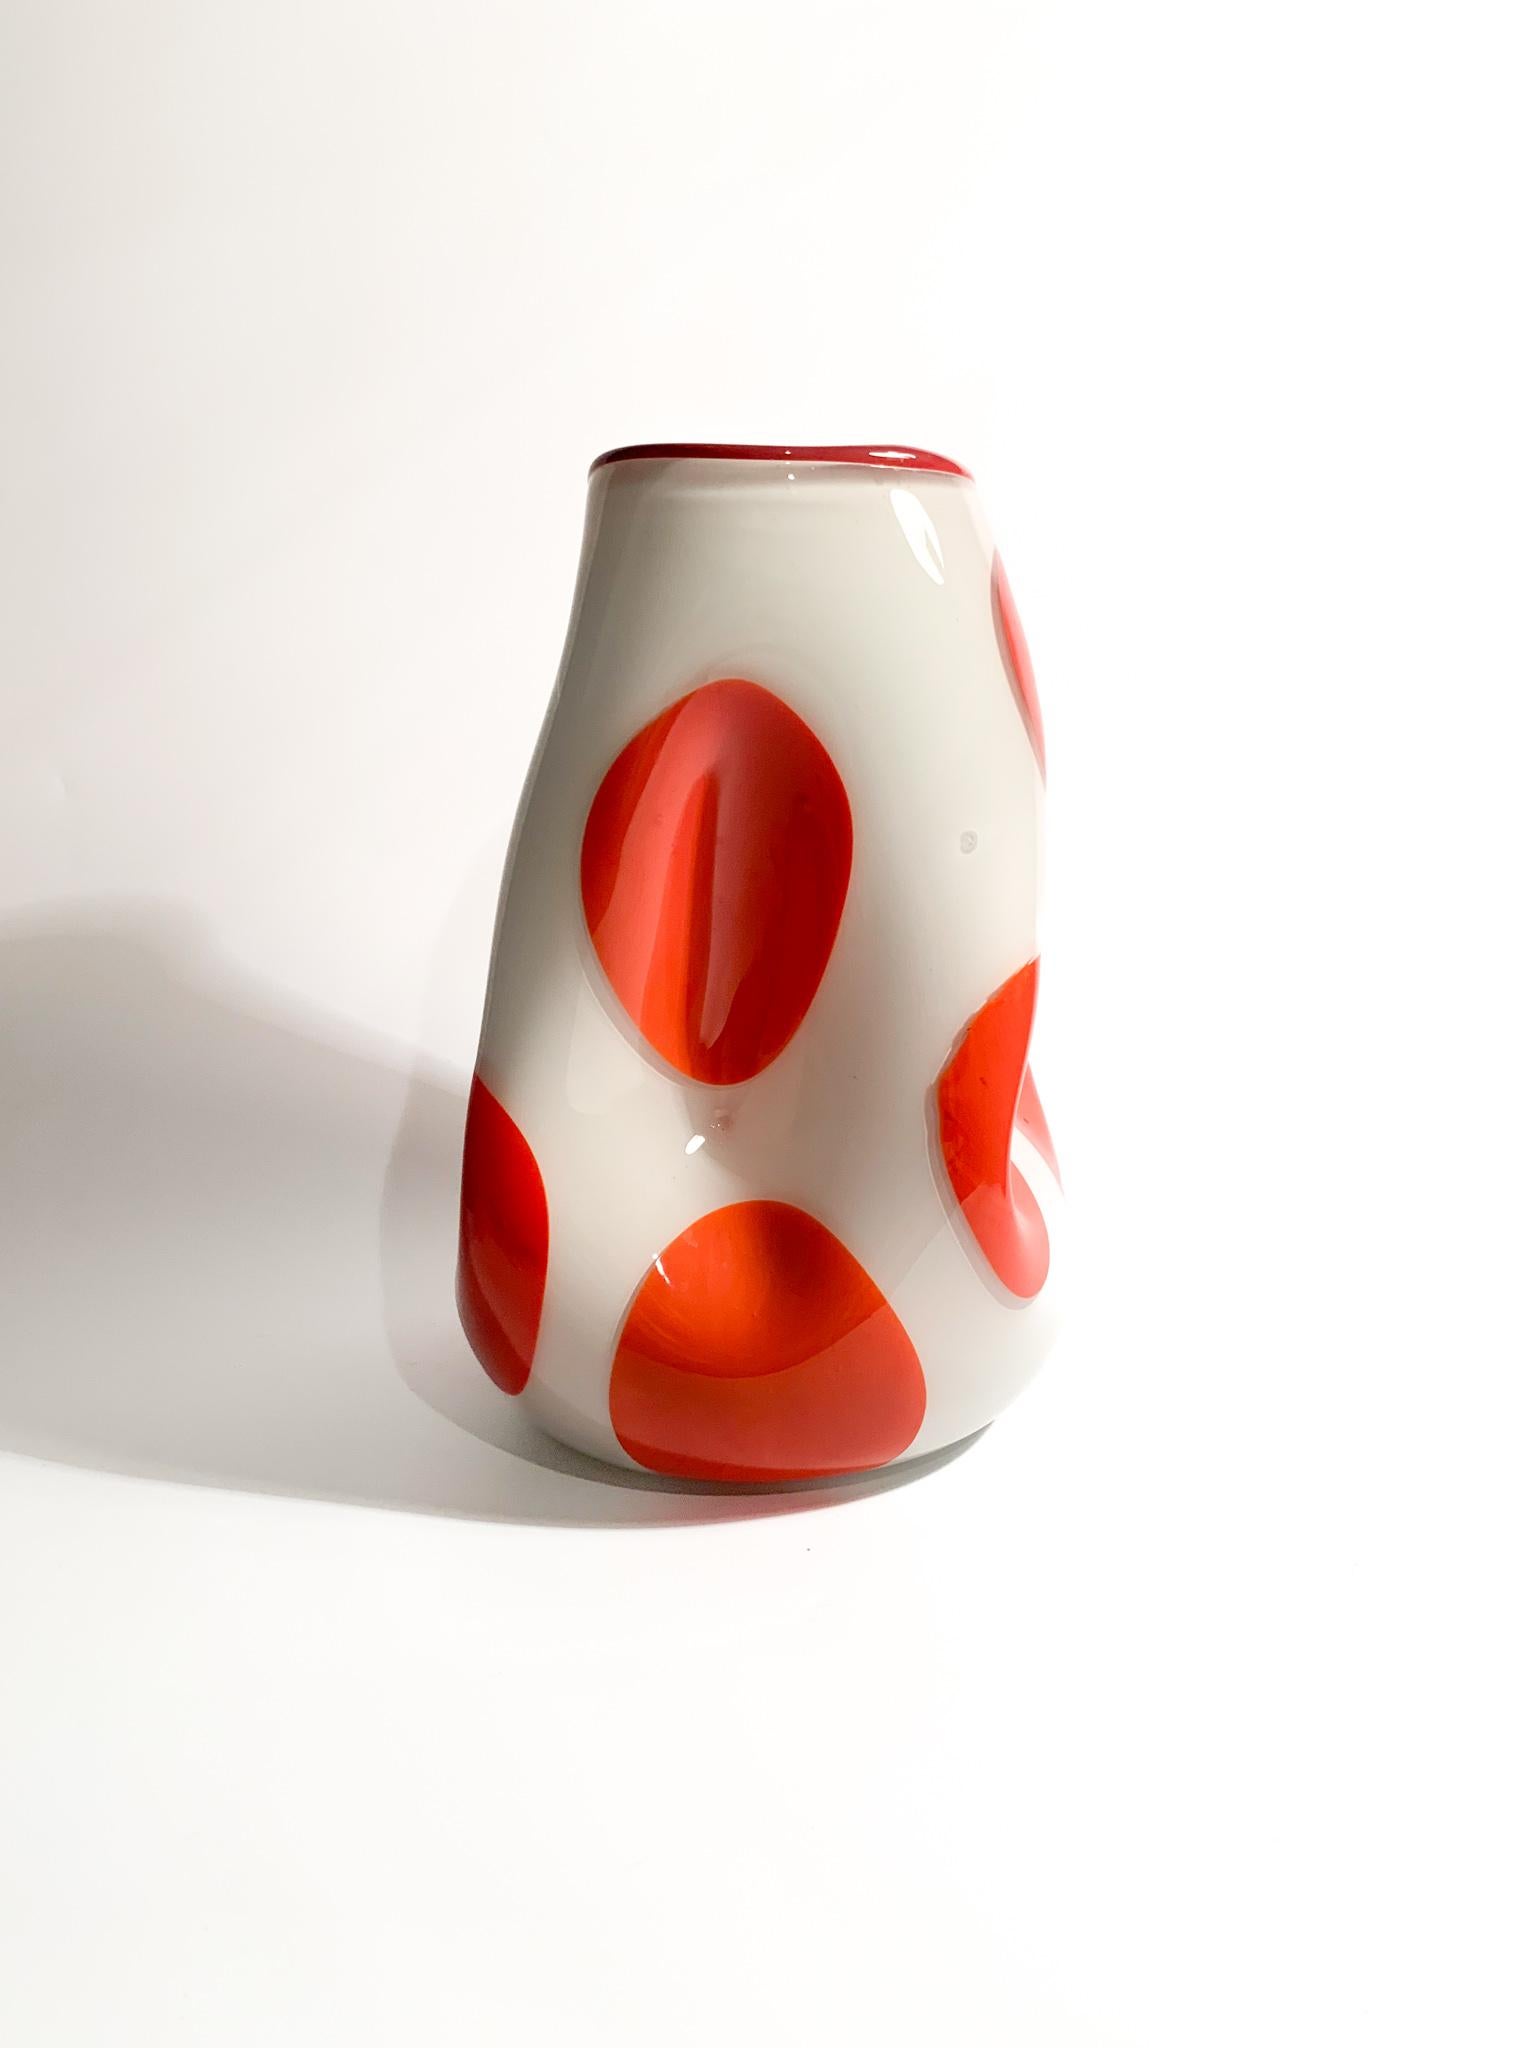 Late 20th Century White and Orange Murano Glass Vase from the 1980s